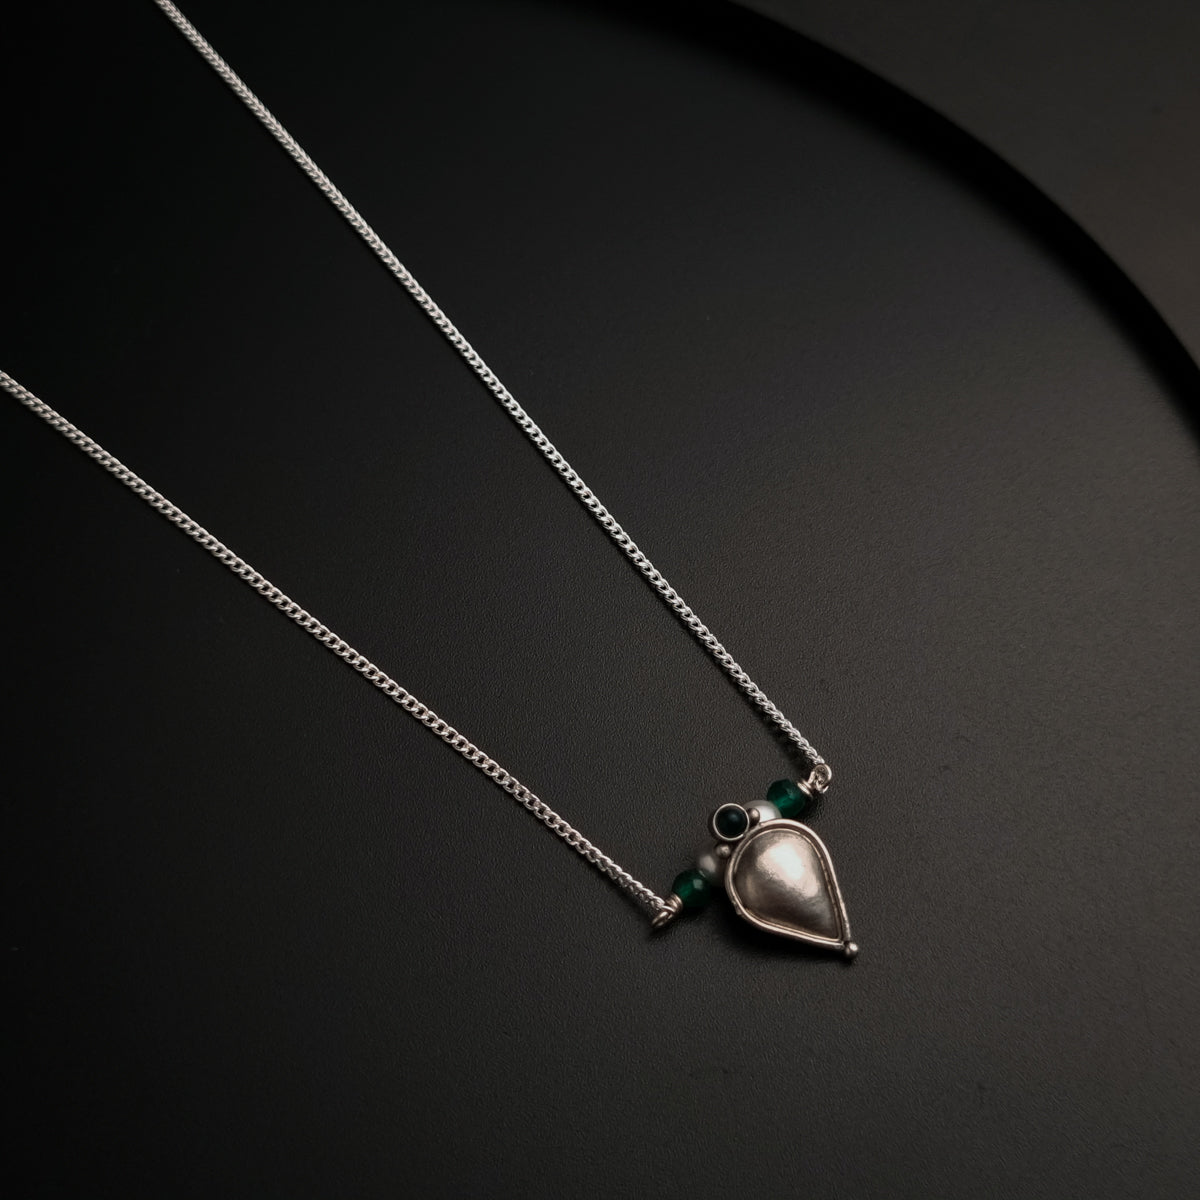 Drop Shape Necklace with Peral and Green Onyx